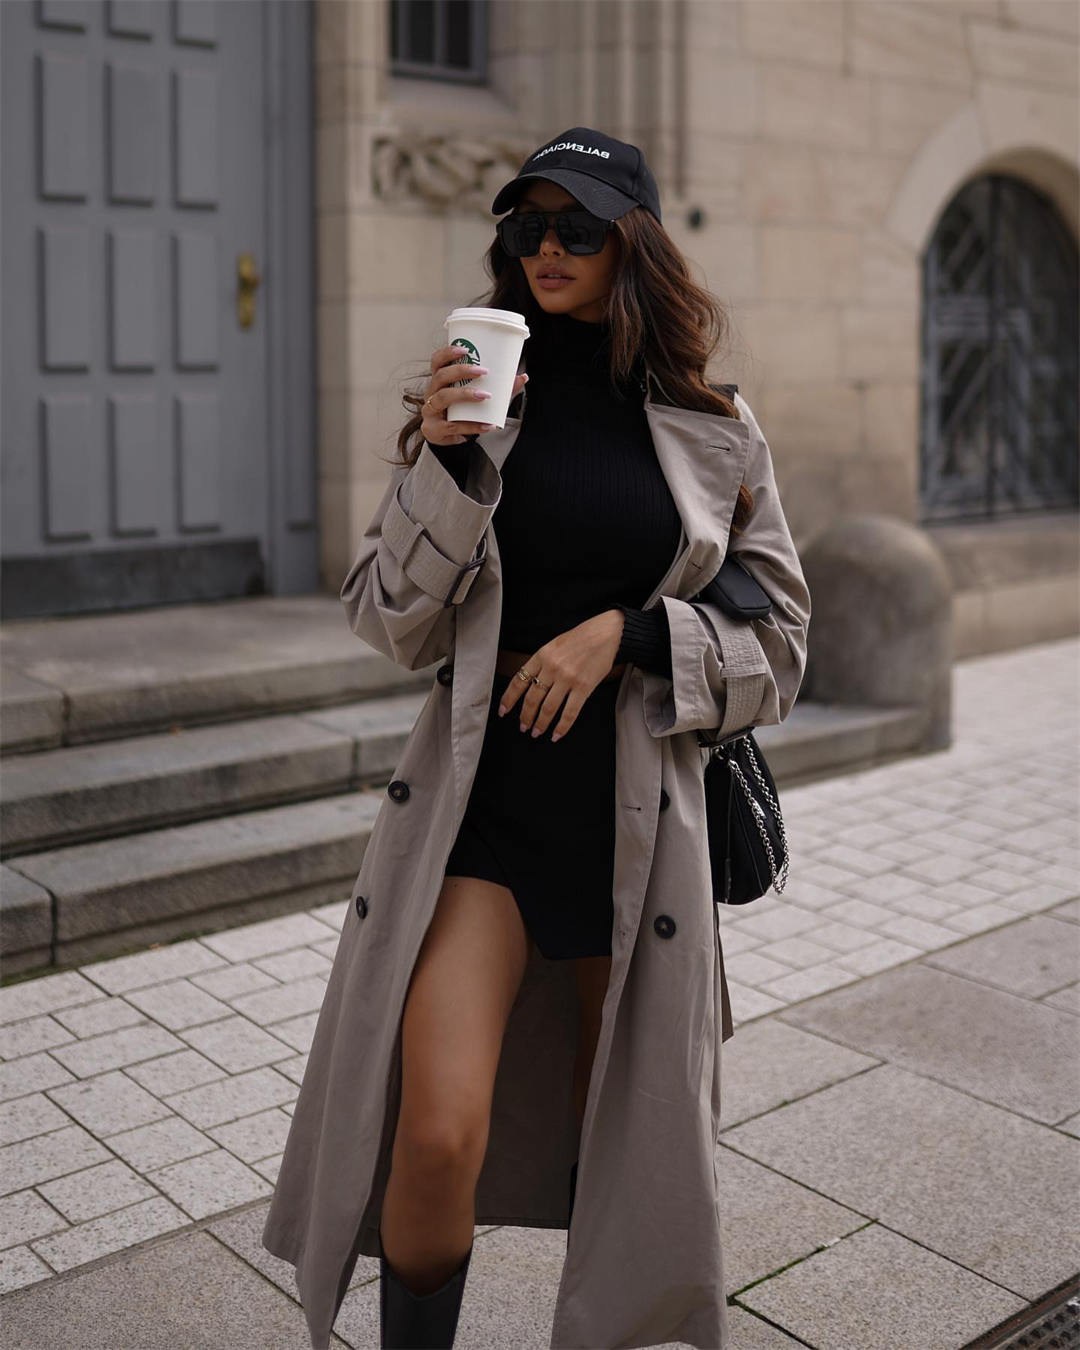 Trench Coat outfit ideas for women 67